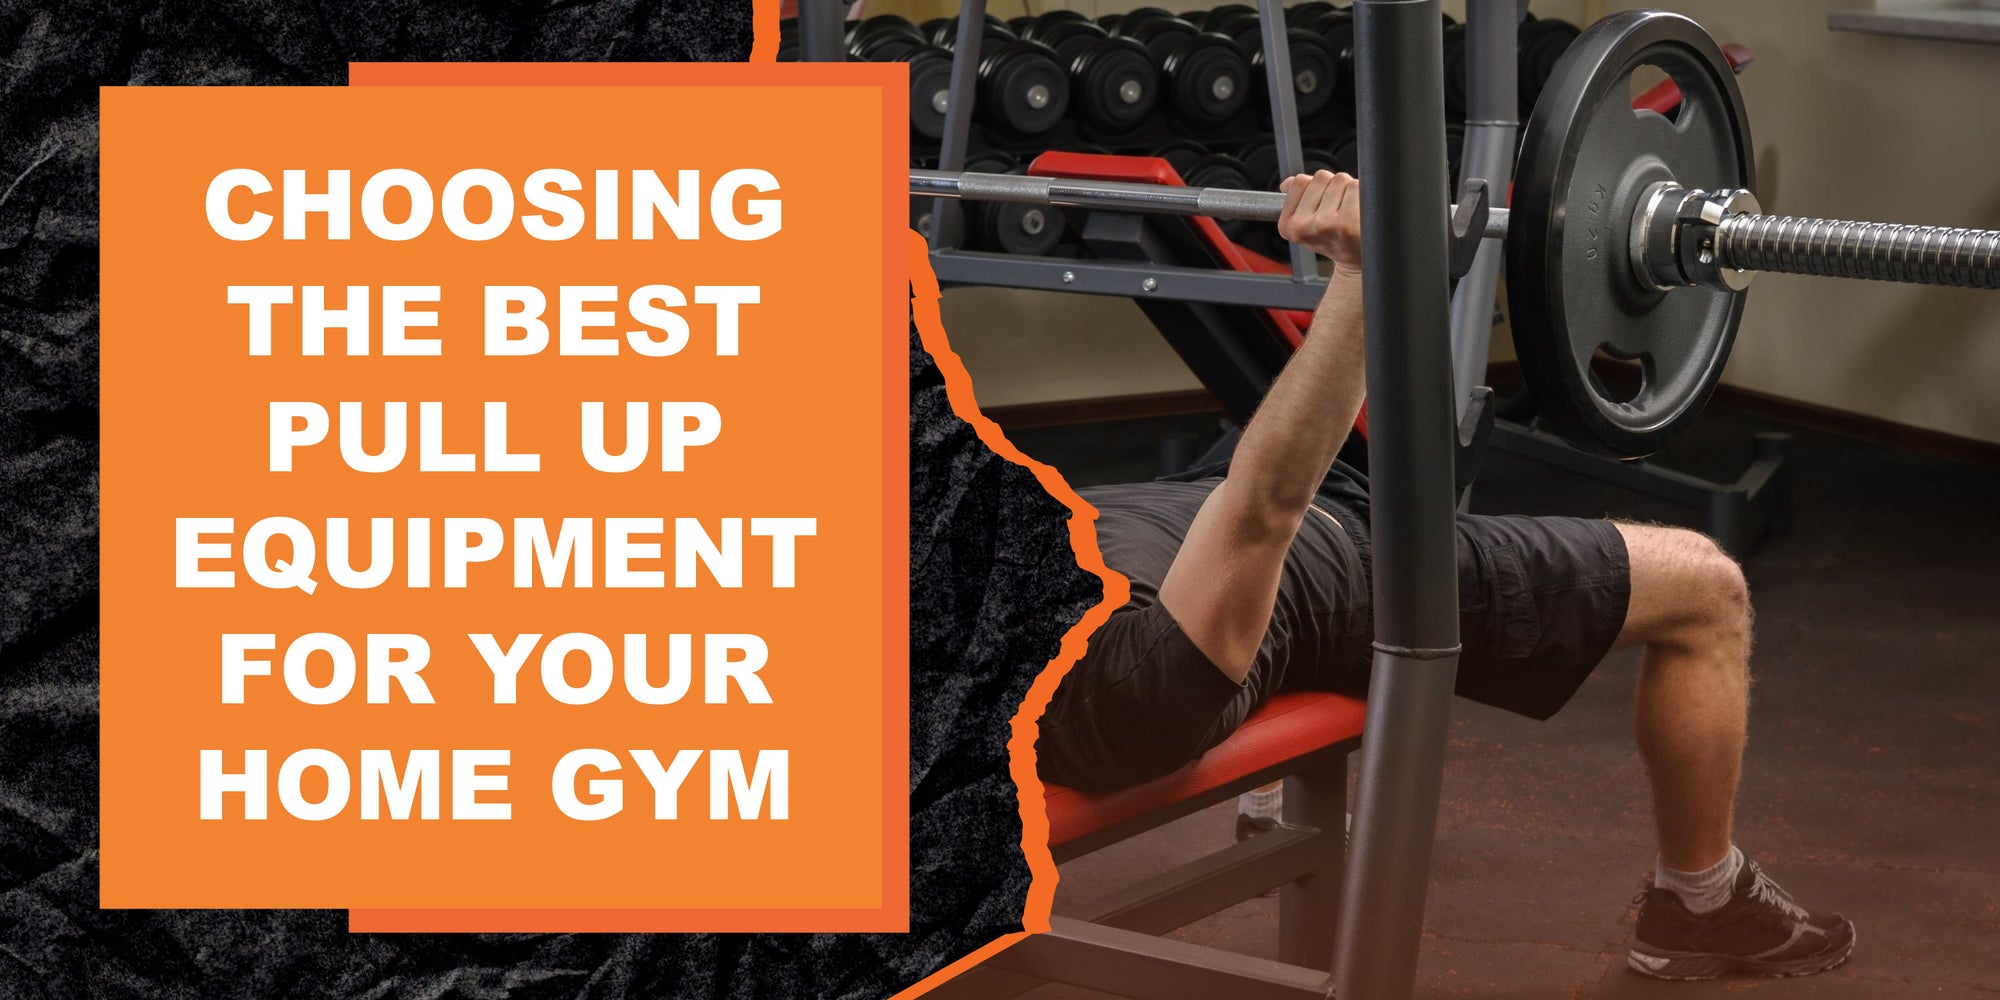 How to Choose the Best Pull Up Equipment for Your Home Gym